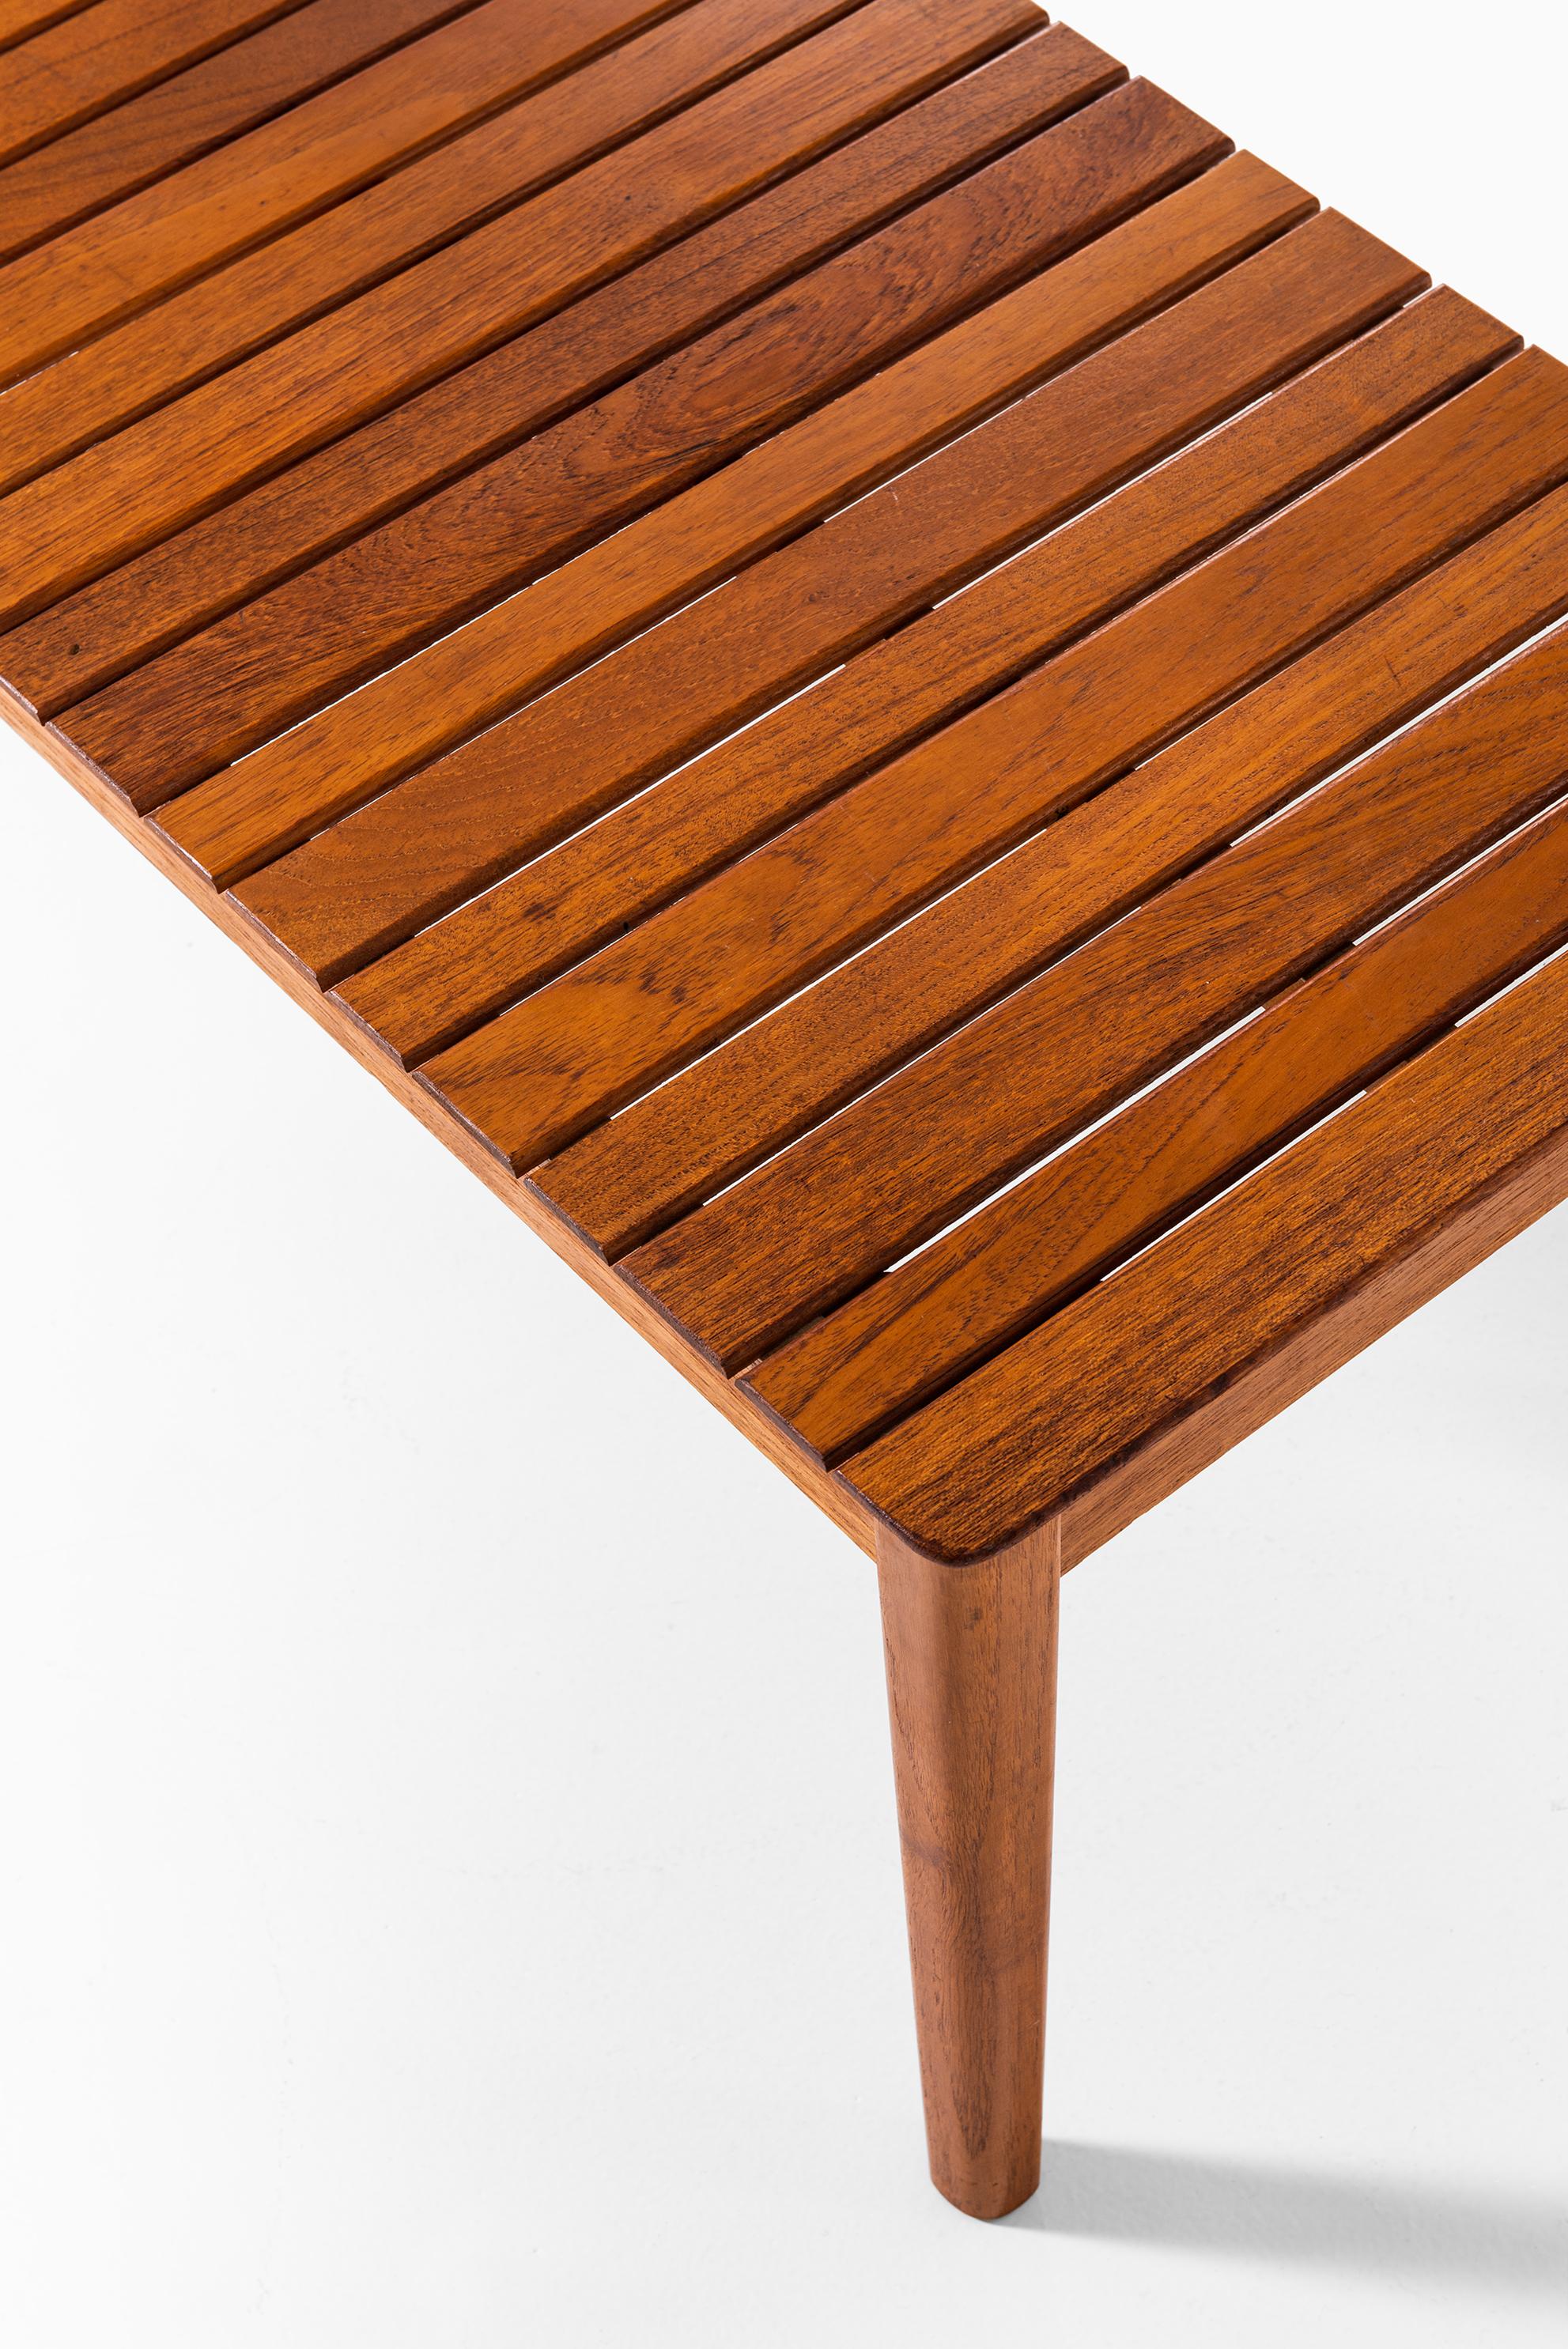 Rare side table or bench in solid teak. Produced by Alberts in Tibro, Sweden.